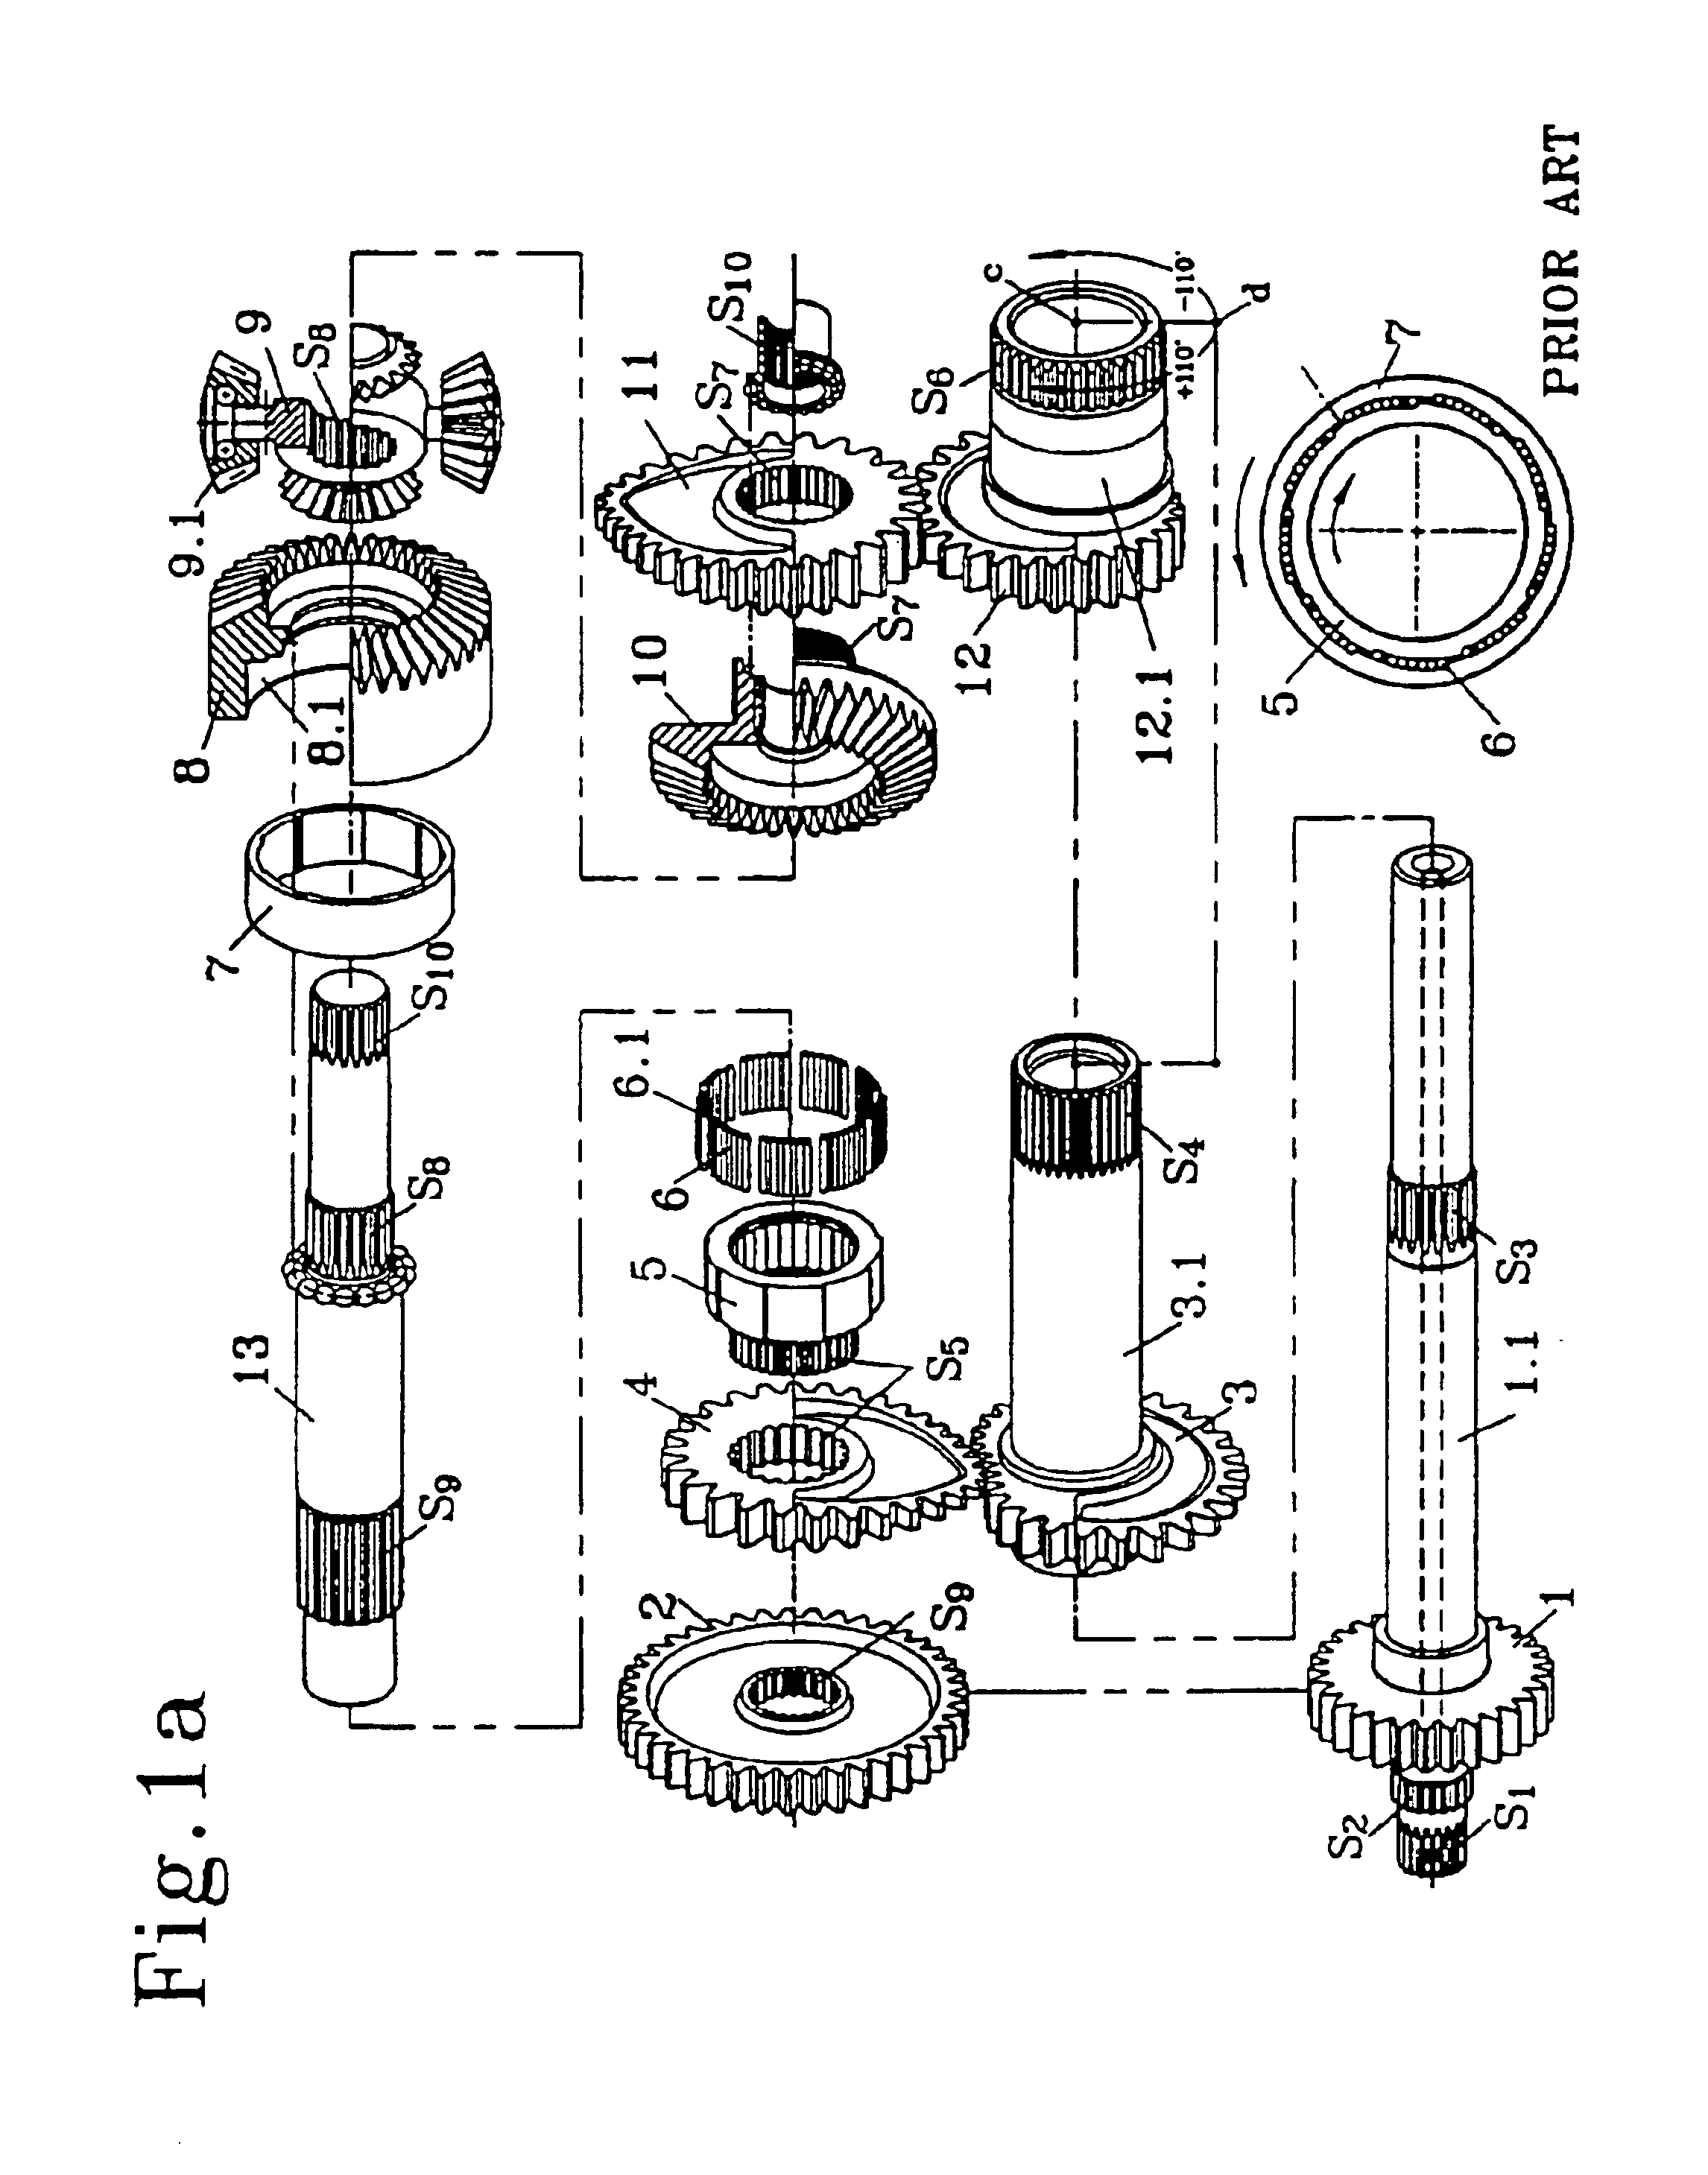 All gear infinitely variable transmission